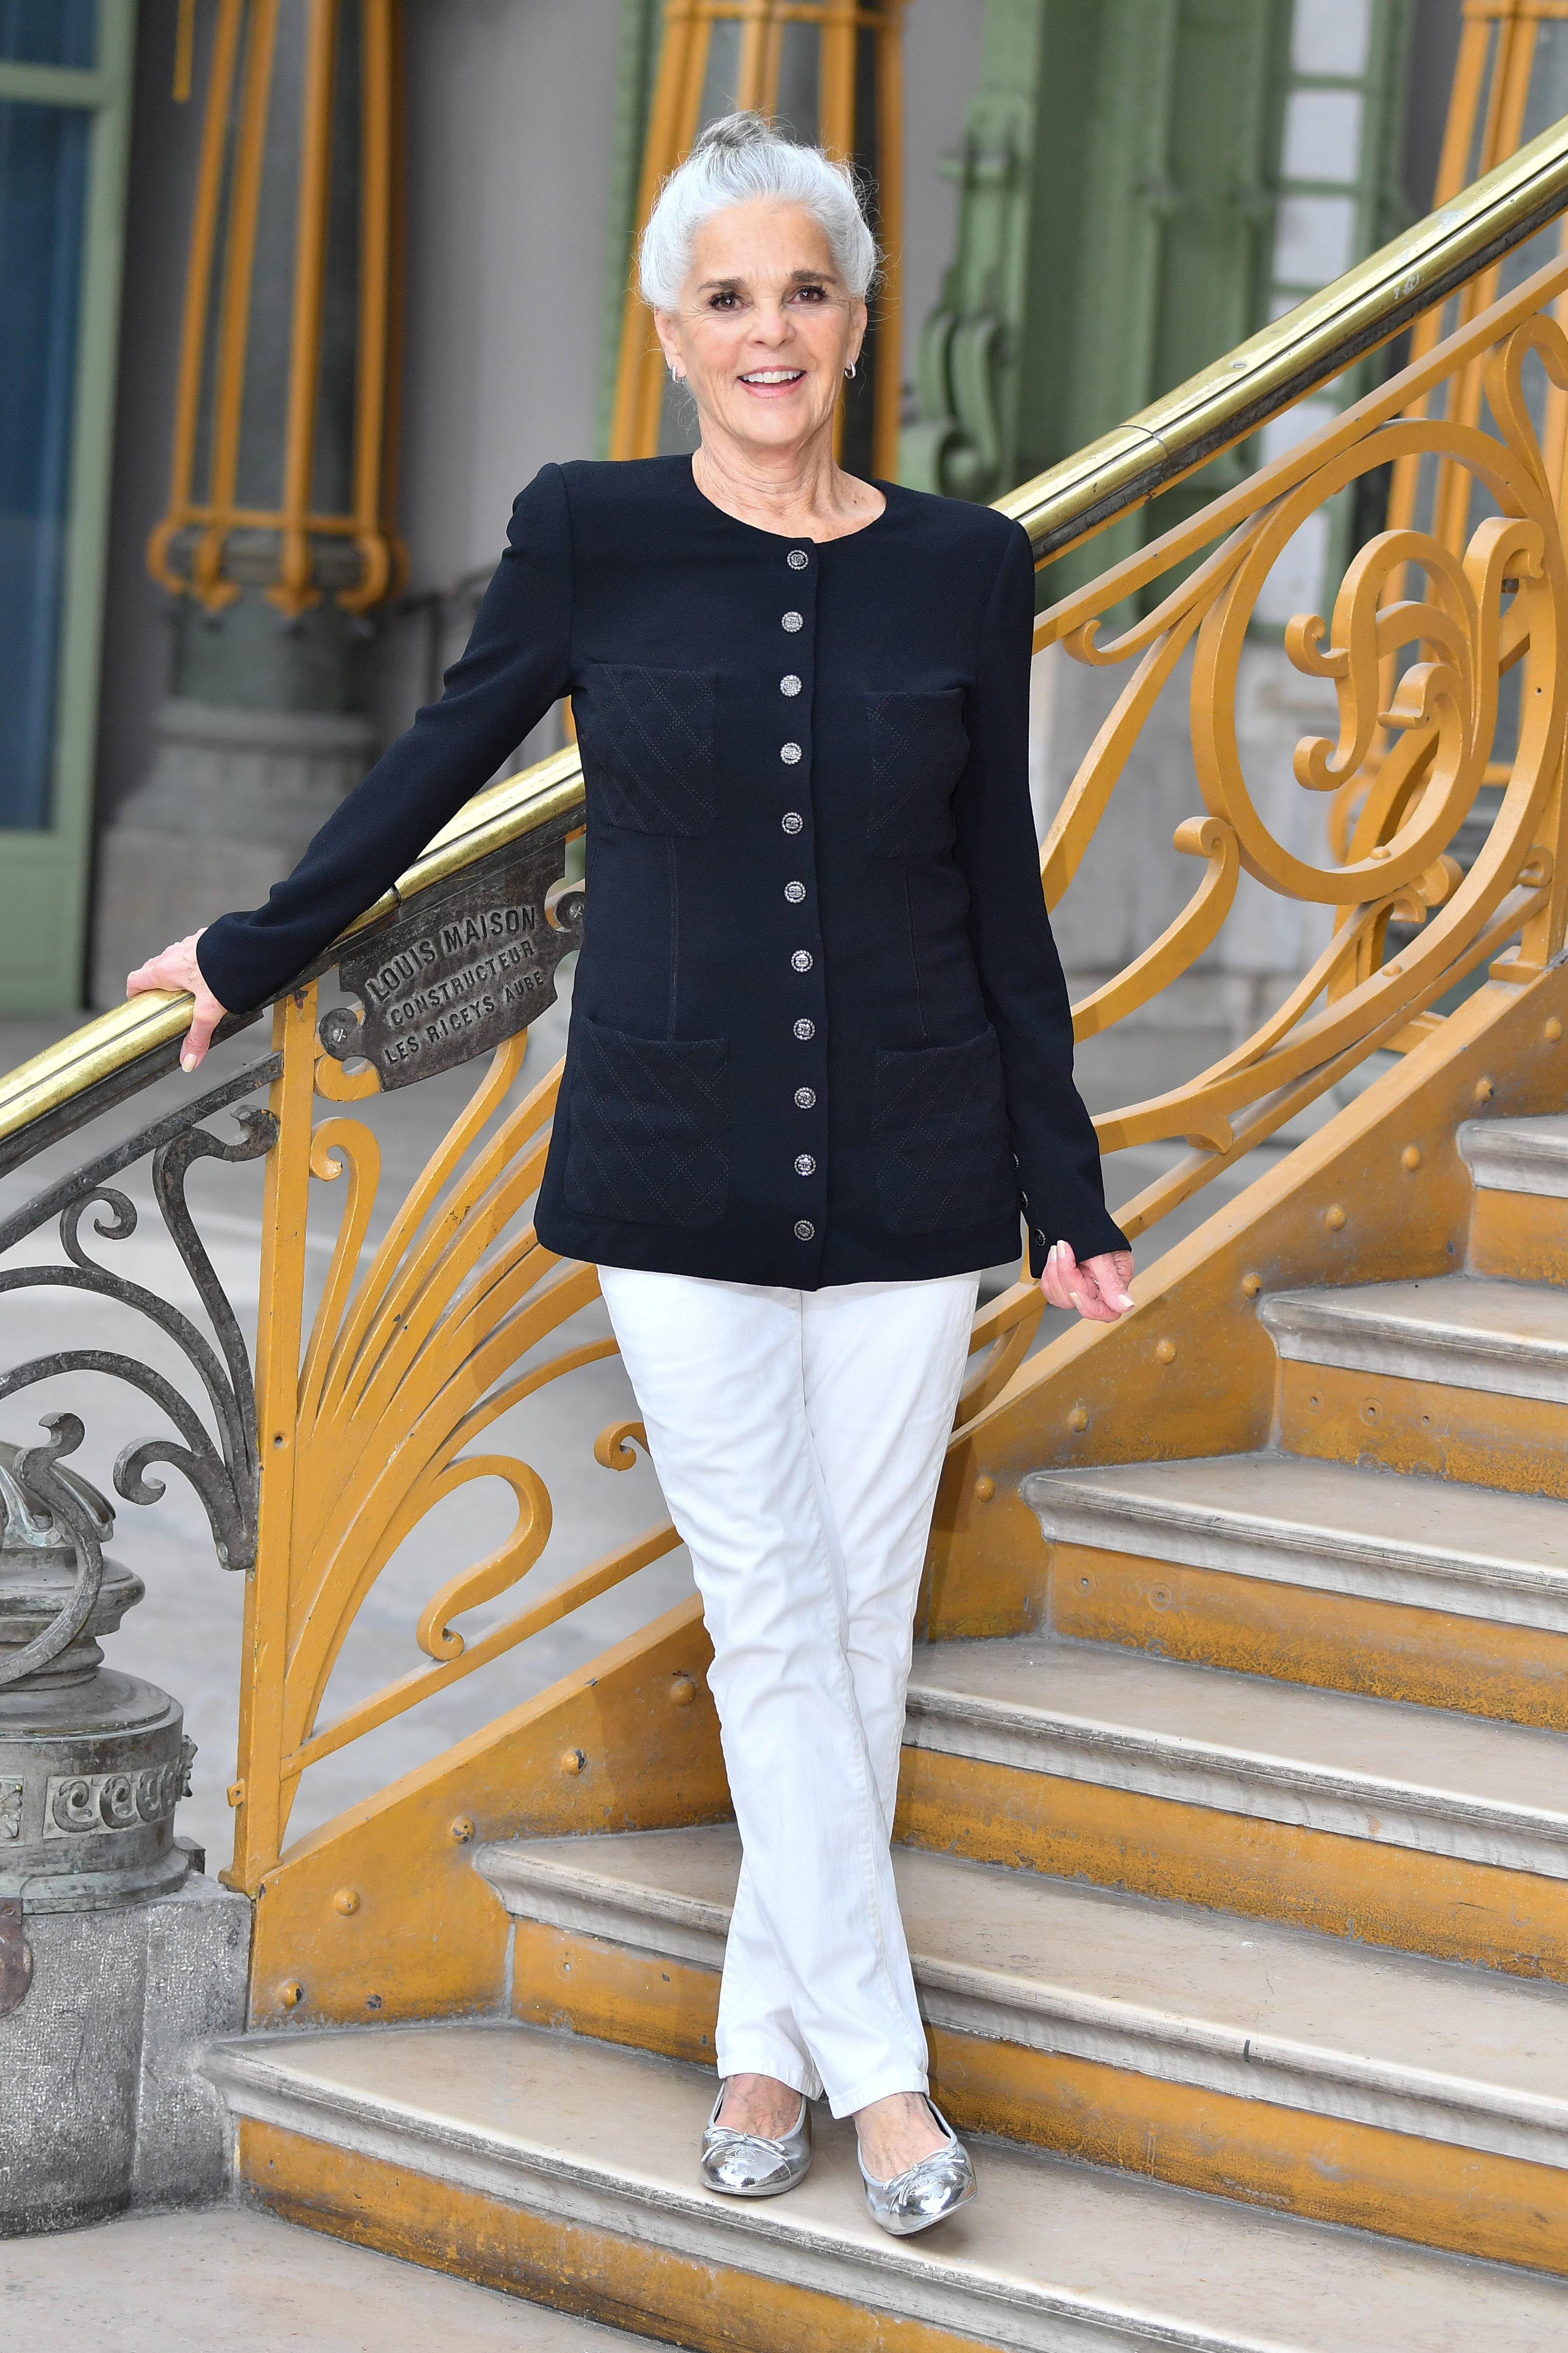 Ali MacGraw at the Chanel Cruise Collection 2020 photocall at Grand Palais | Source: Getty Images